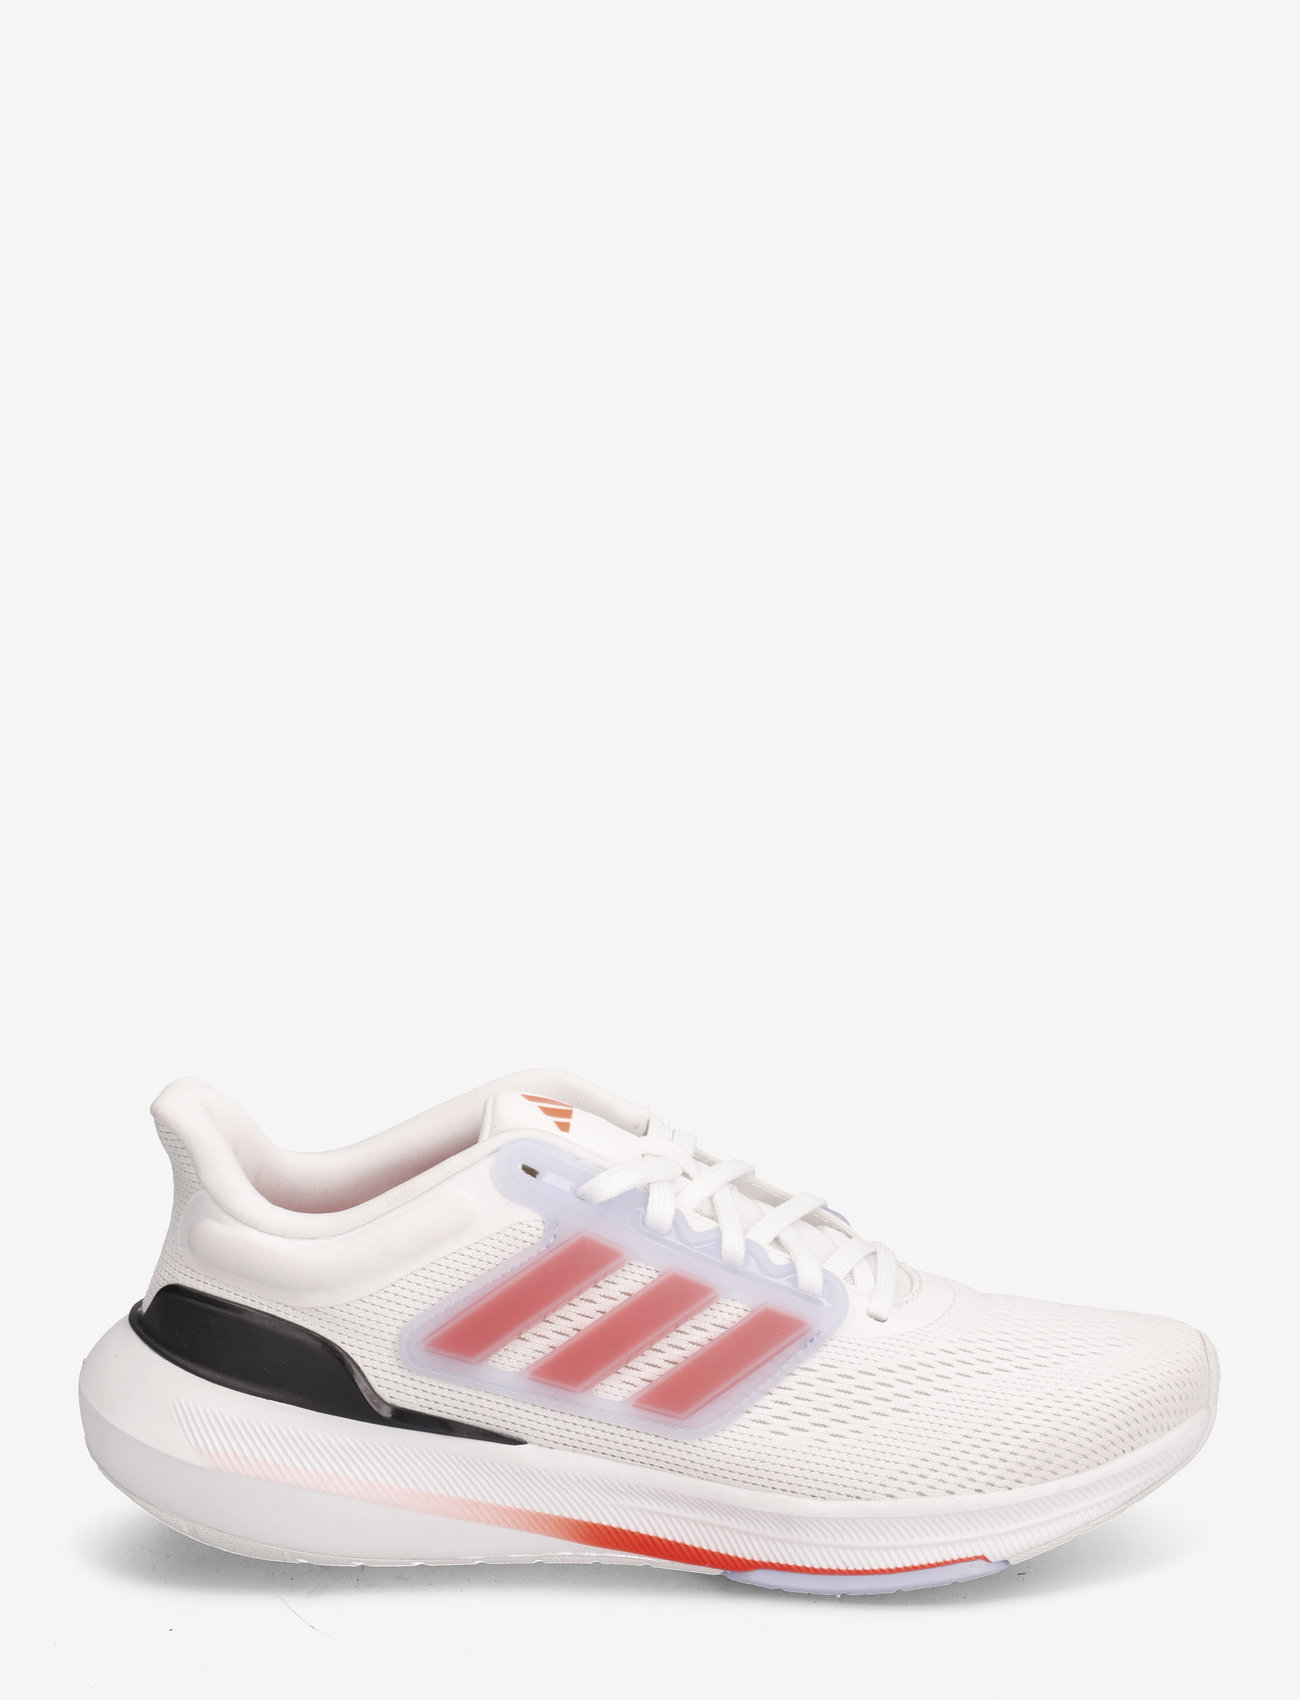 adidas Performance - Ultrabounce Shoes - løpesko - ftwwht/solred/crywht - 1